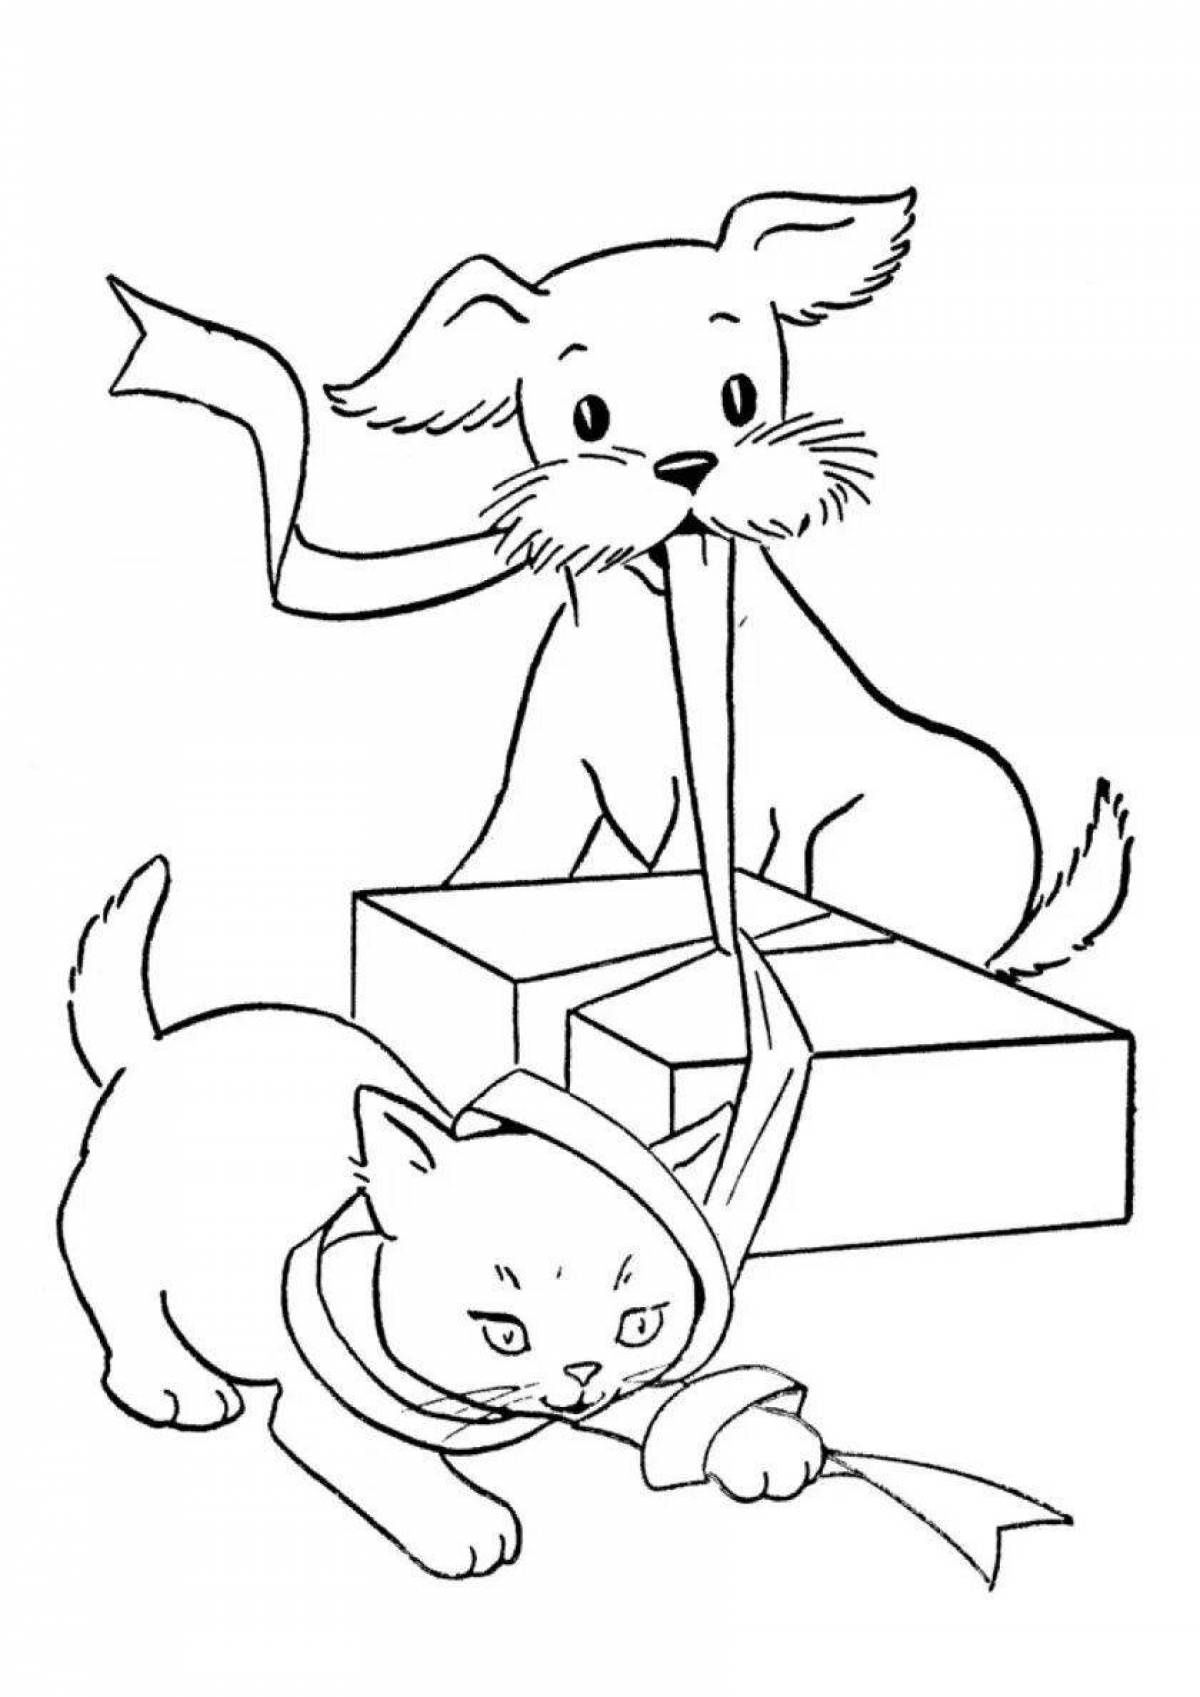 Joyful dog and cat coloring page